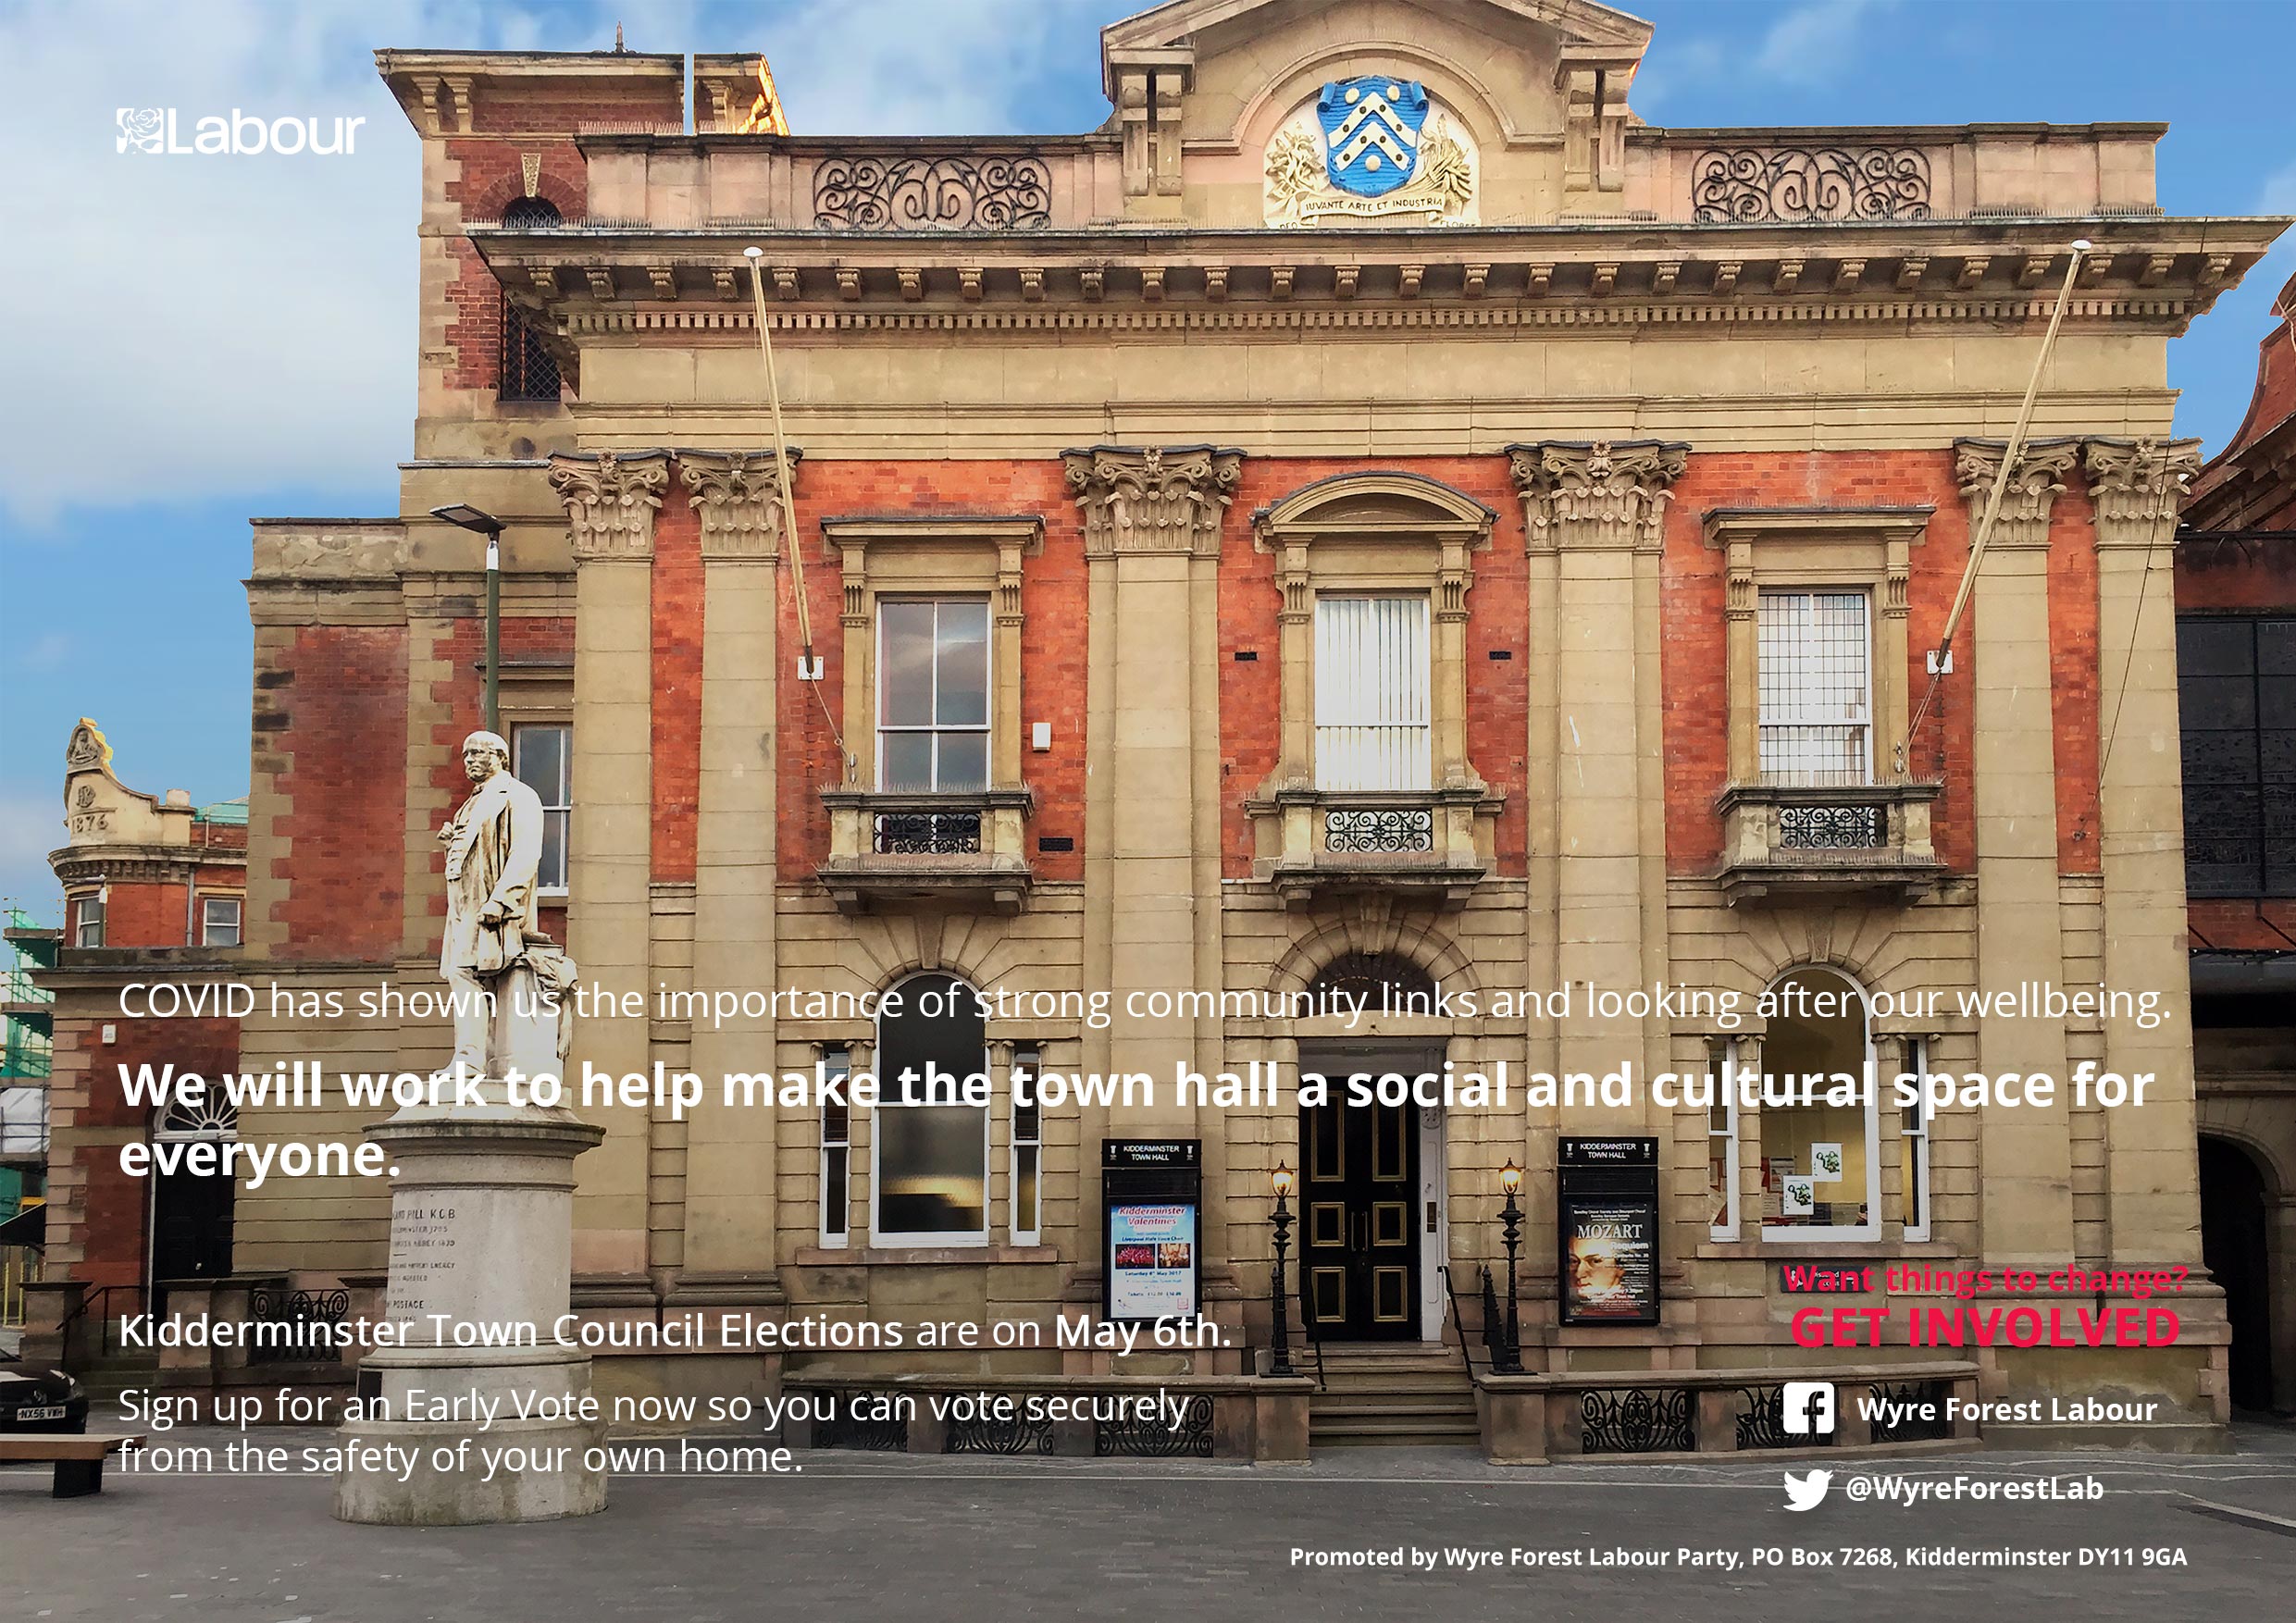 Kidderminster Town Hall: We will work to make the town hall a social and cultural space for everyone